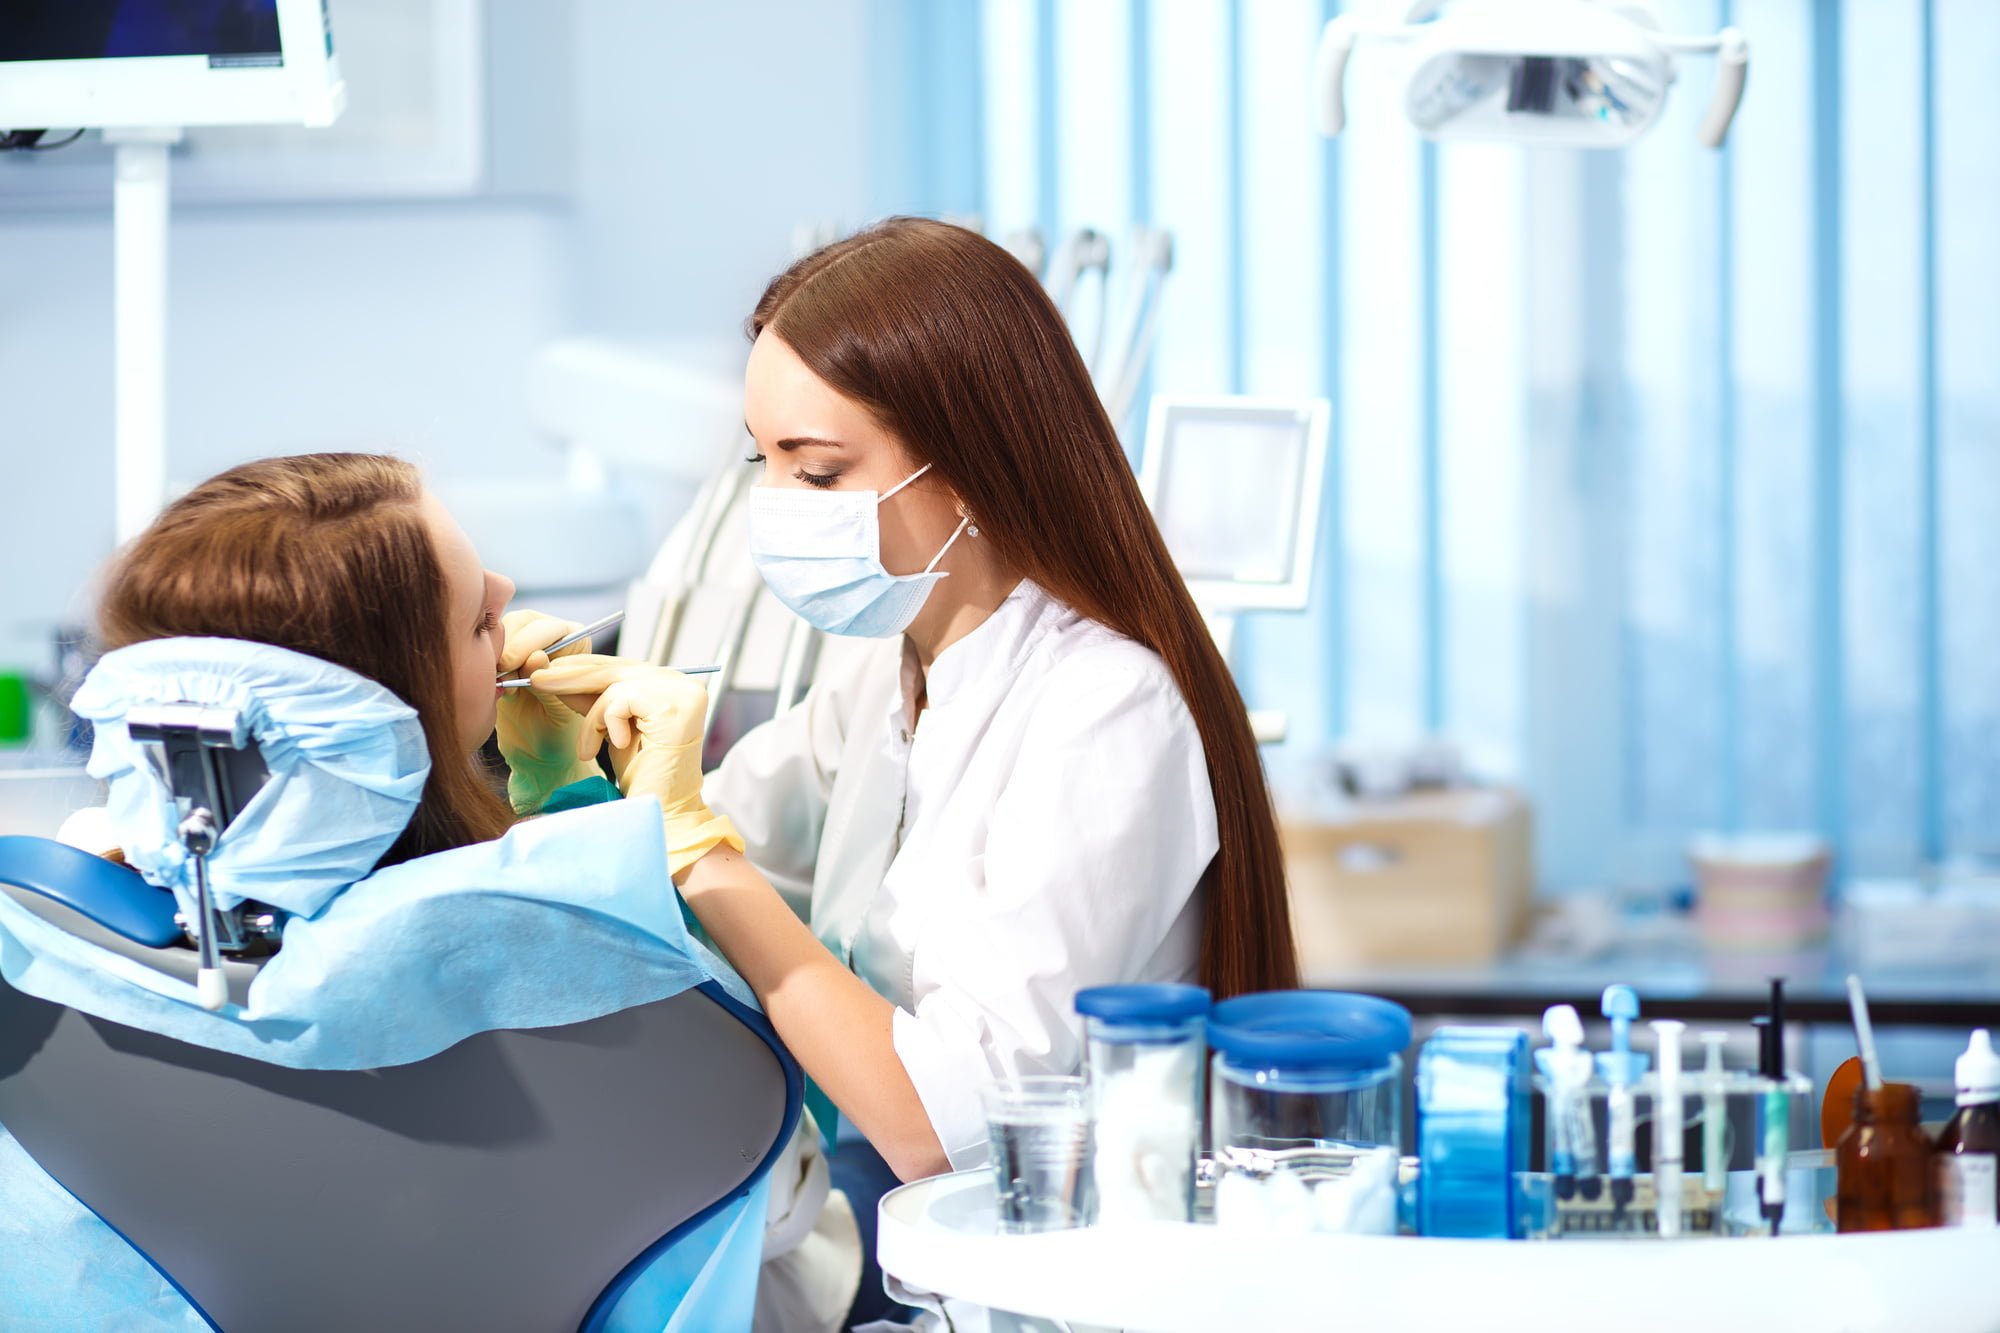 Are you looking for dental clinics in Australia? Here are some helpful tips for making sure you find the right option for you.